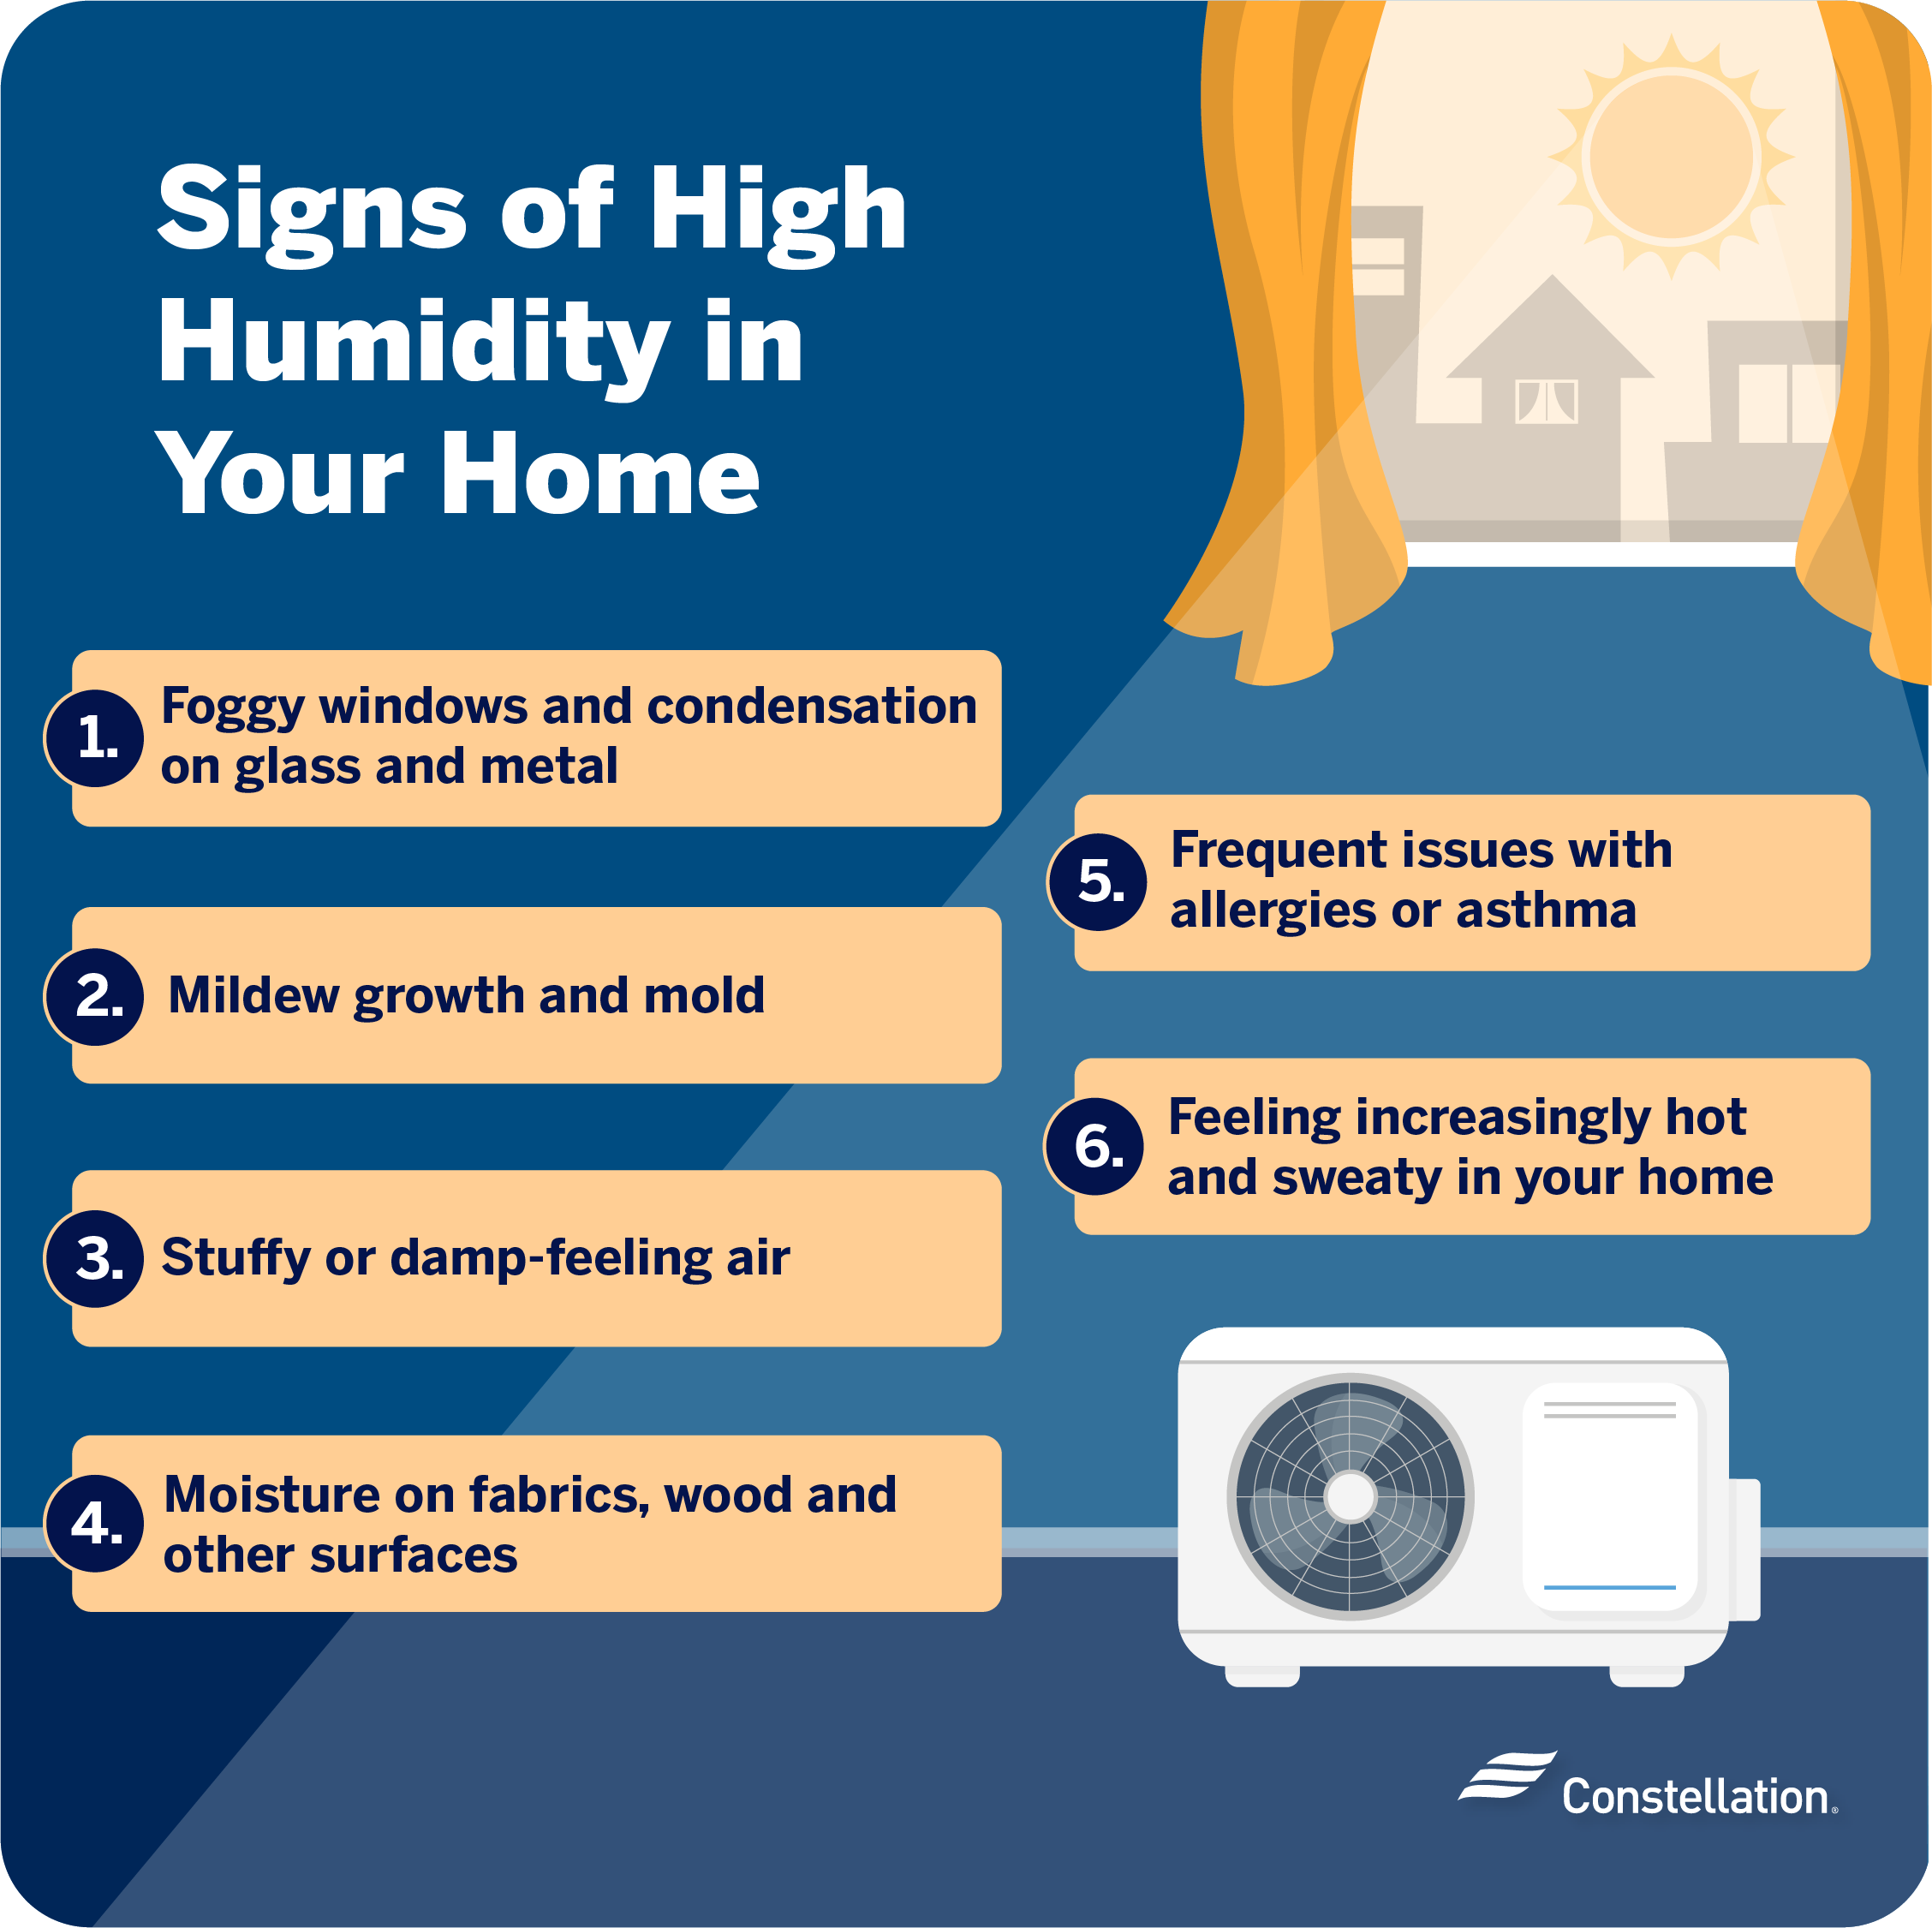 How to tell if humidity is high in your home?